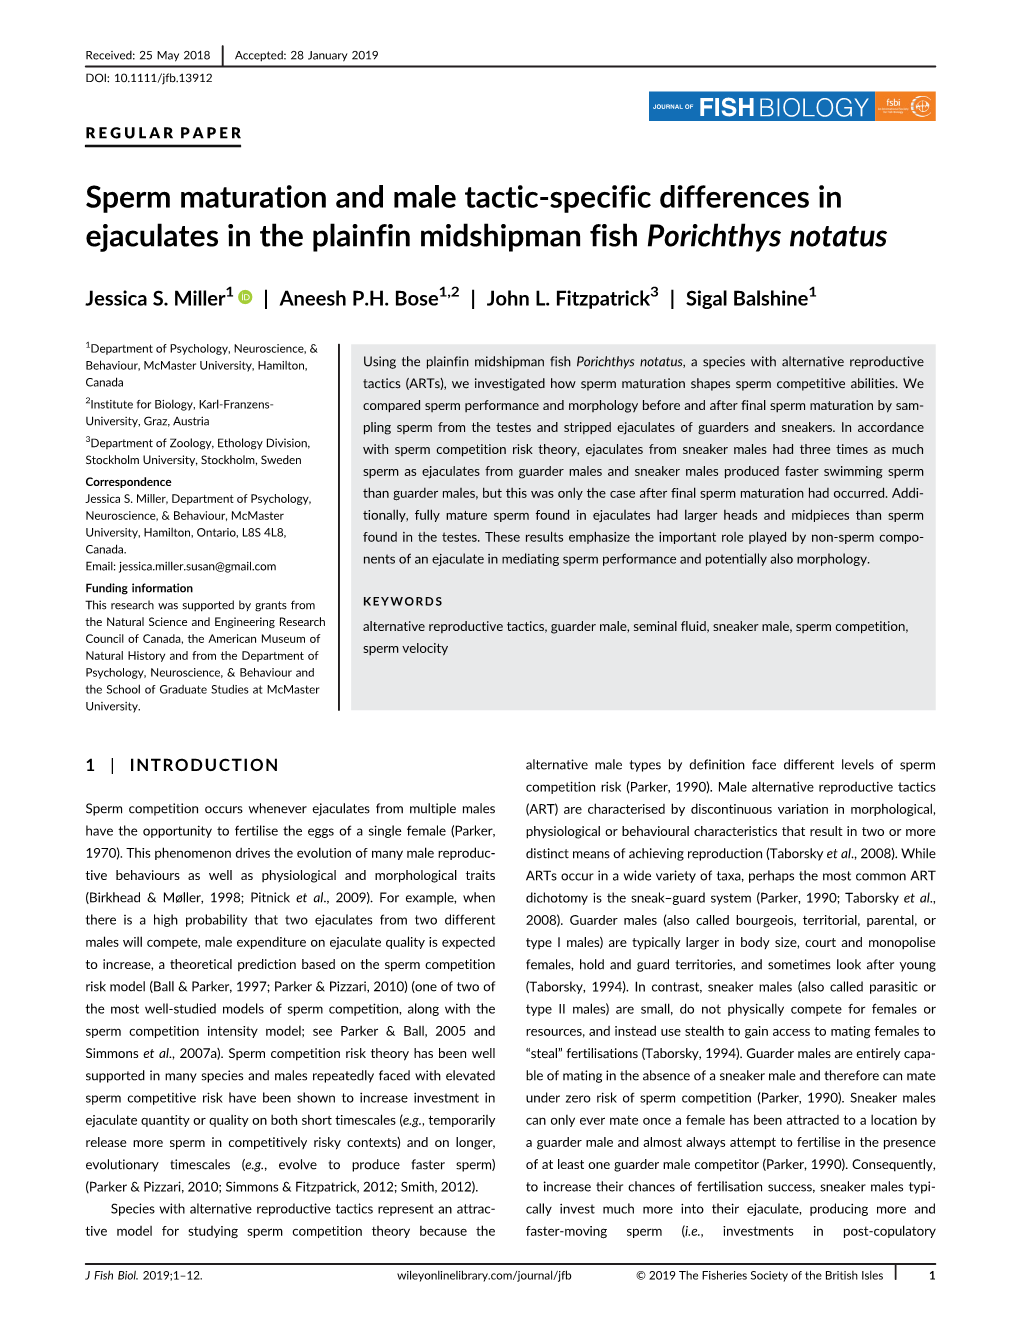 Sperm Maturation and Male Tactic-Specific Differences in Ejaculates in the Plainfin Midshipman Fish Porichthys Notatus